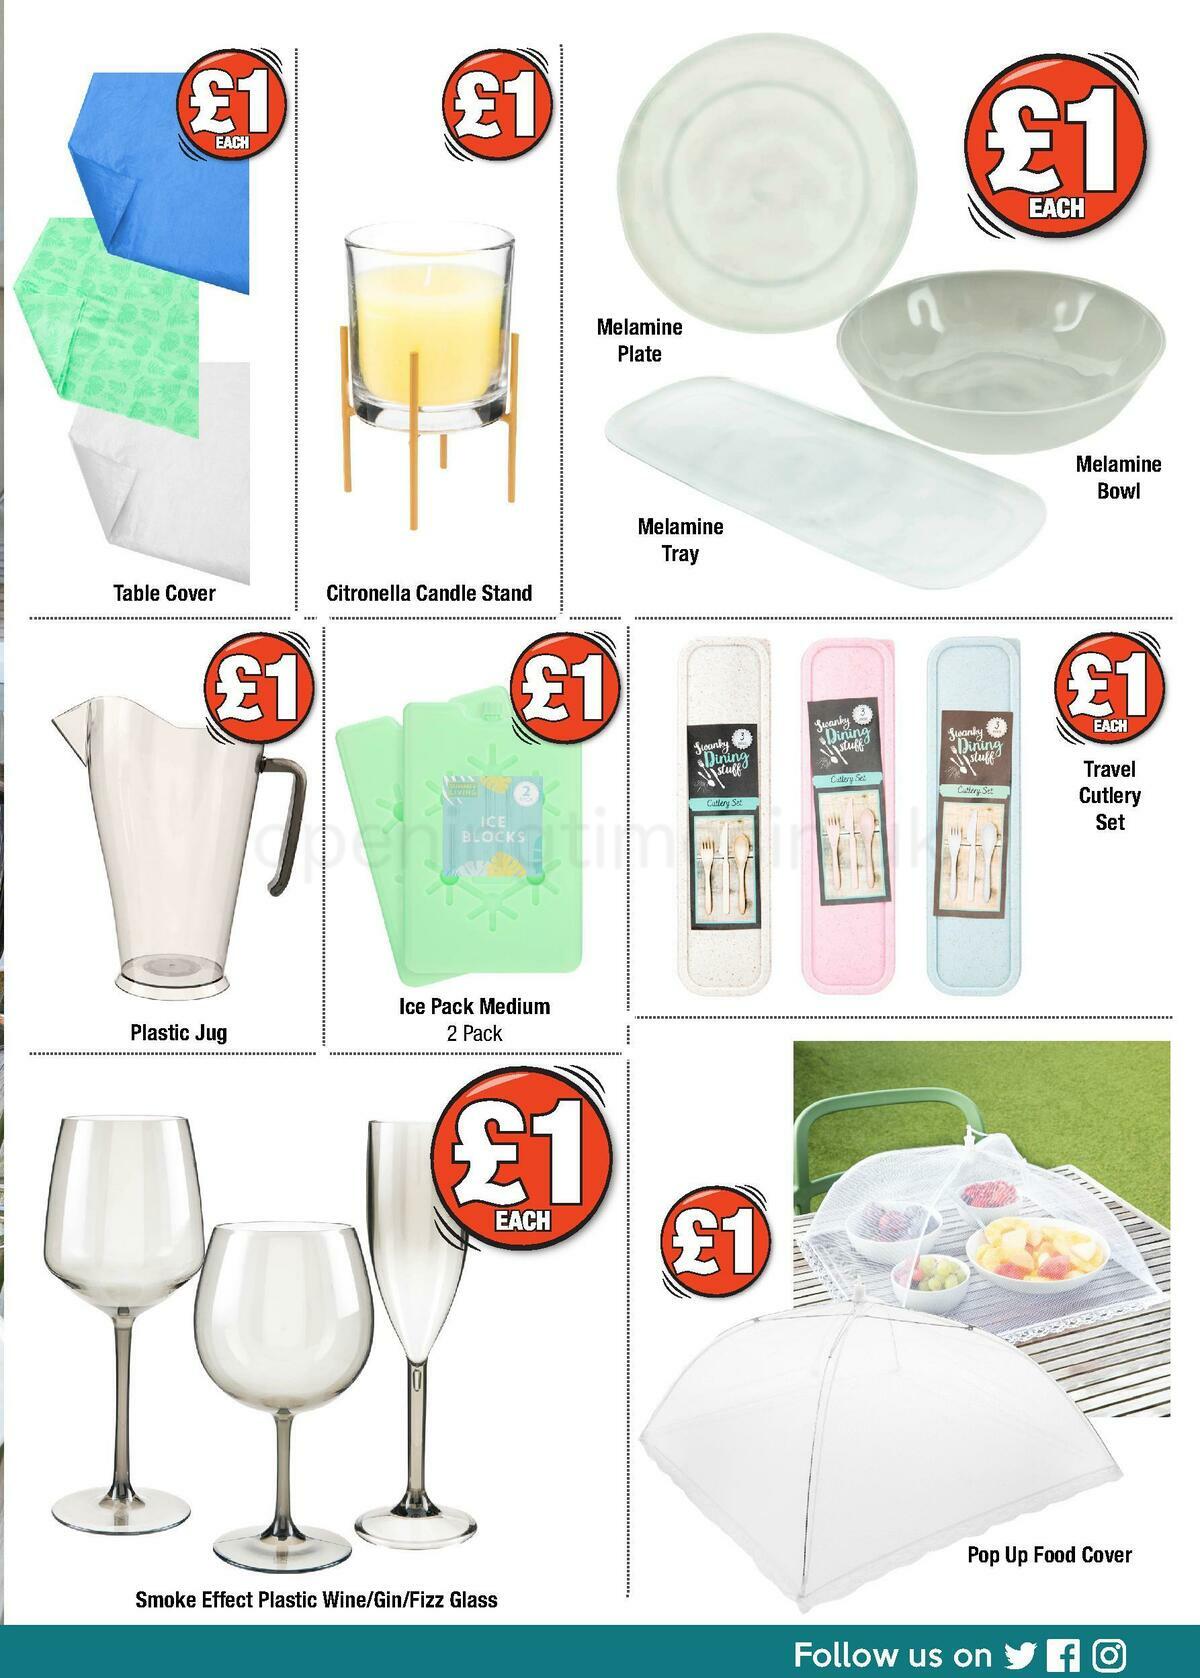 Poundland Offers from 27 April